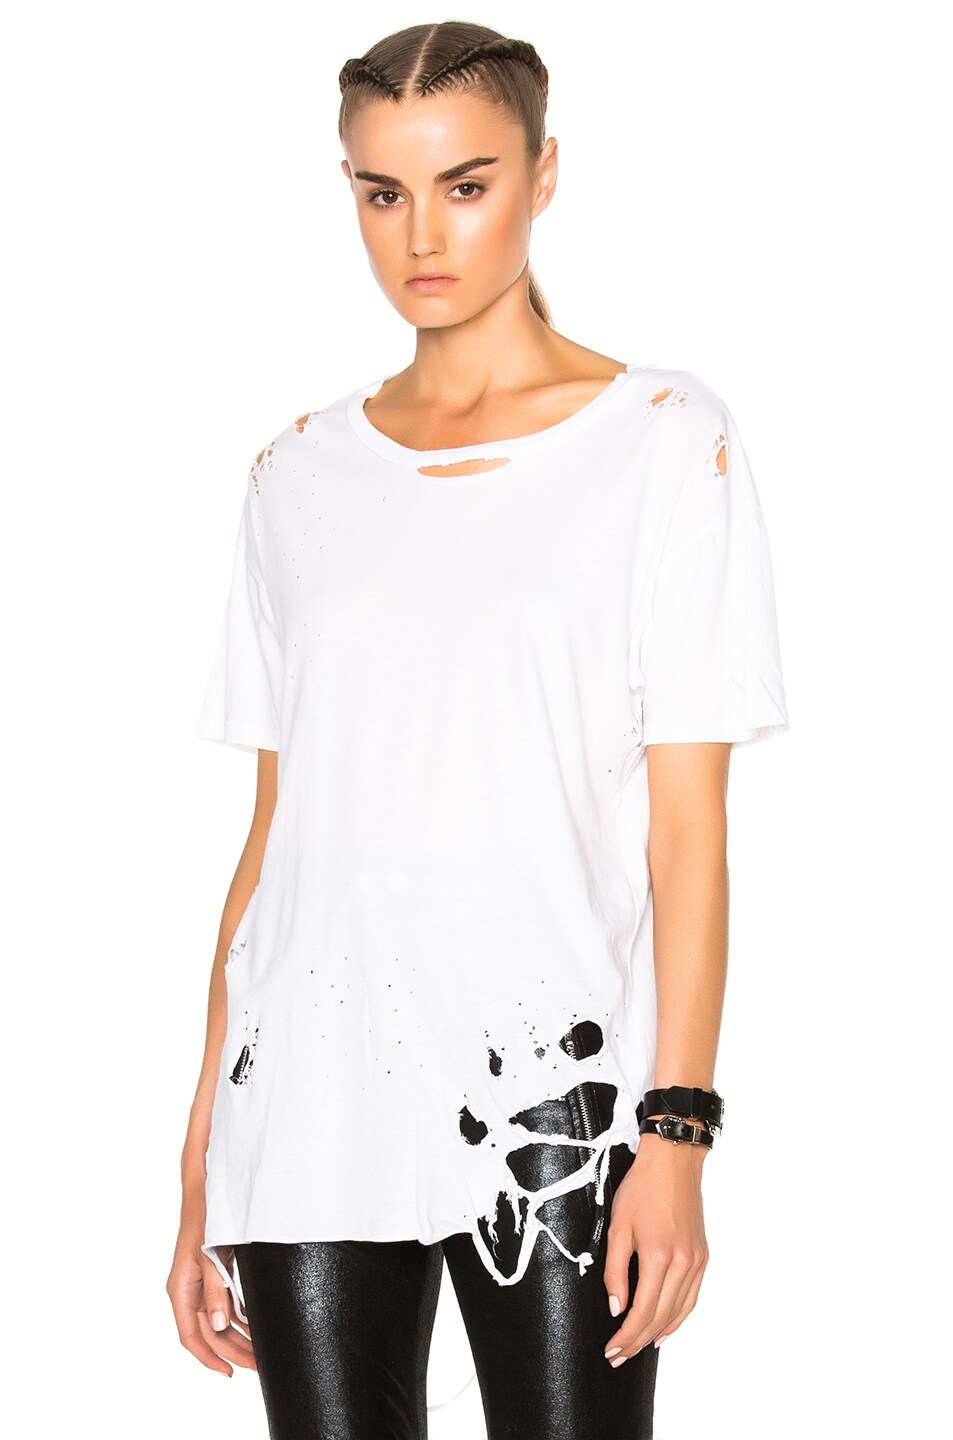 Image 1 of Enfants Riches Deprimes Perfect Shredded Tee in White